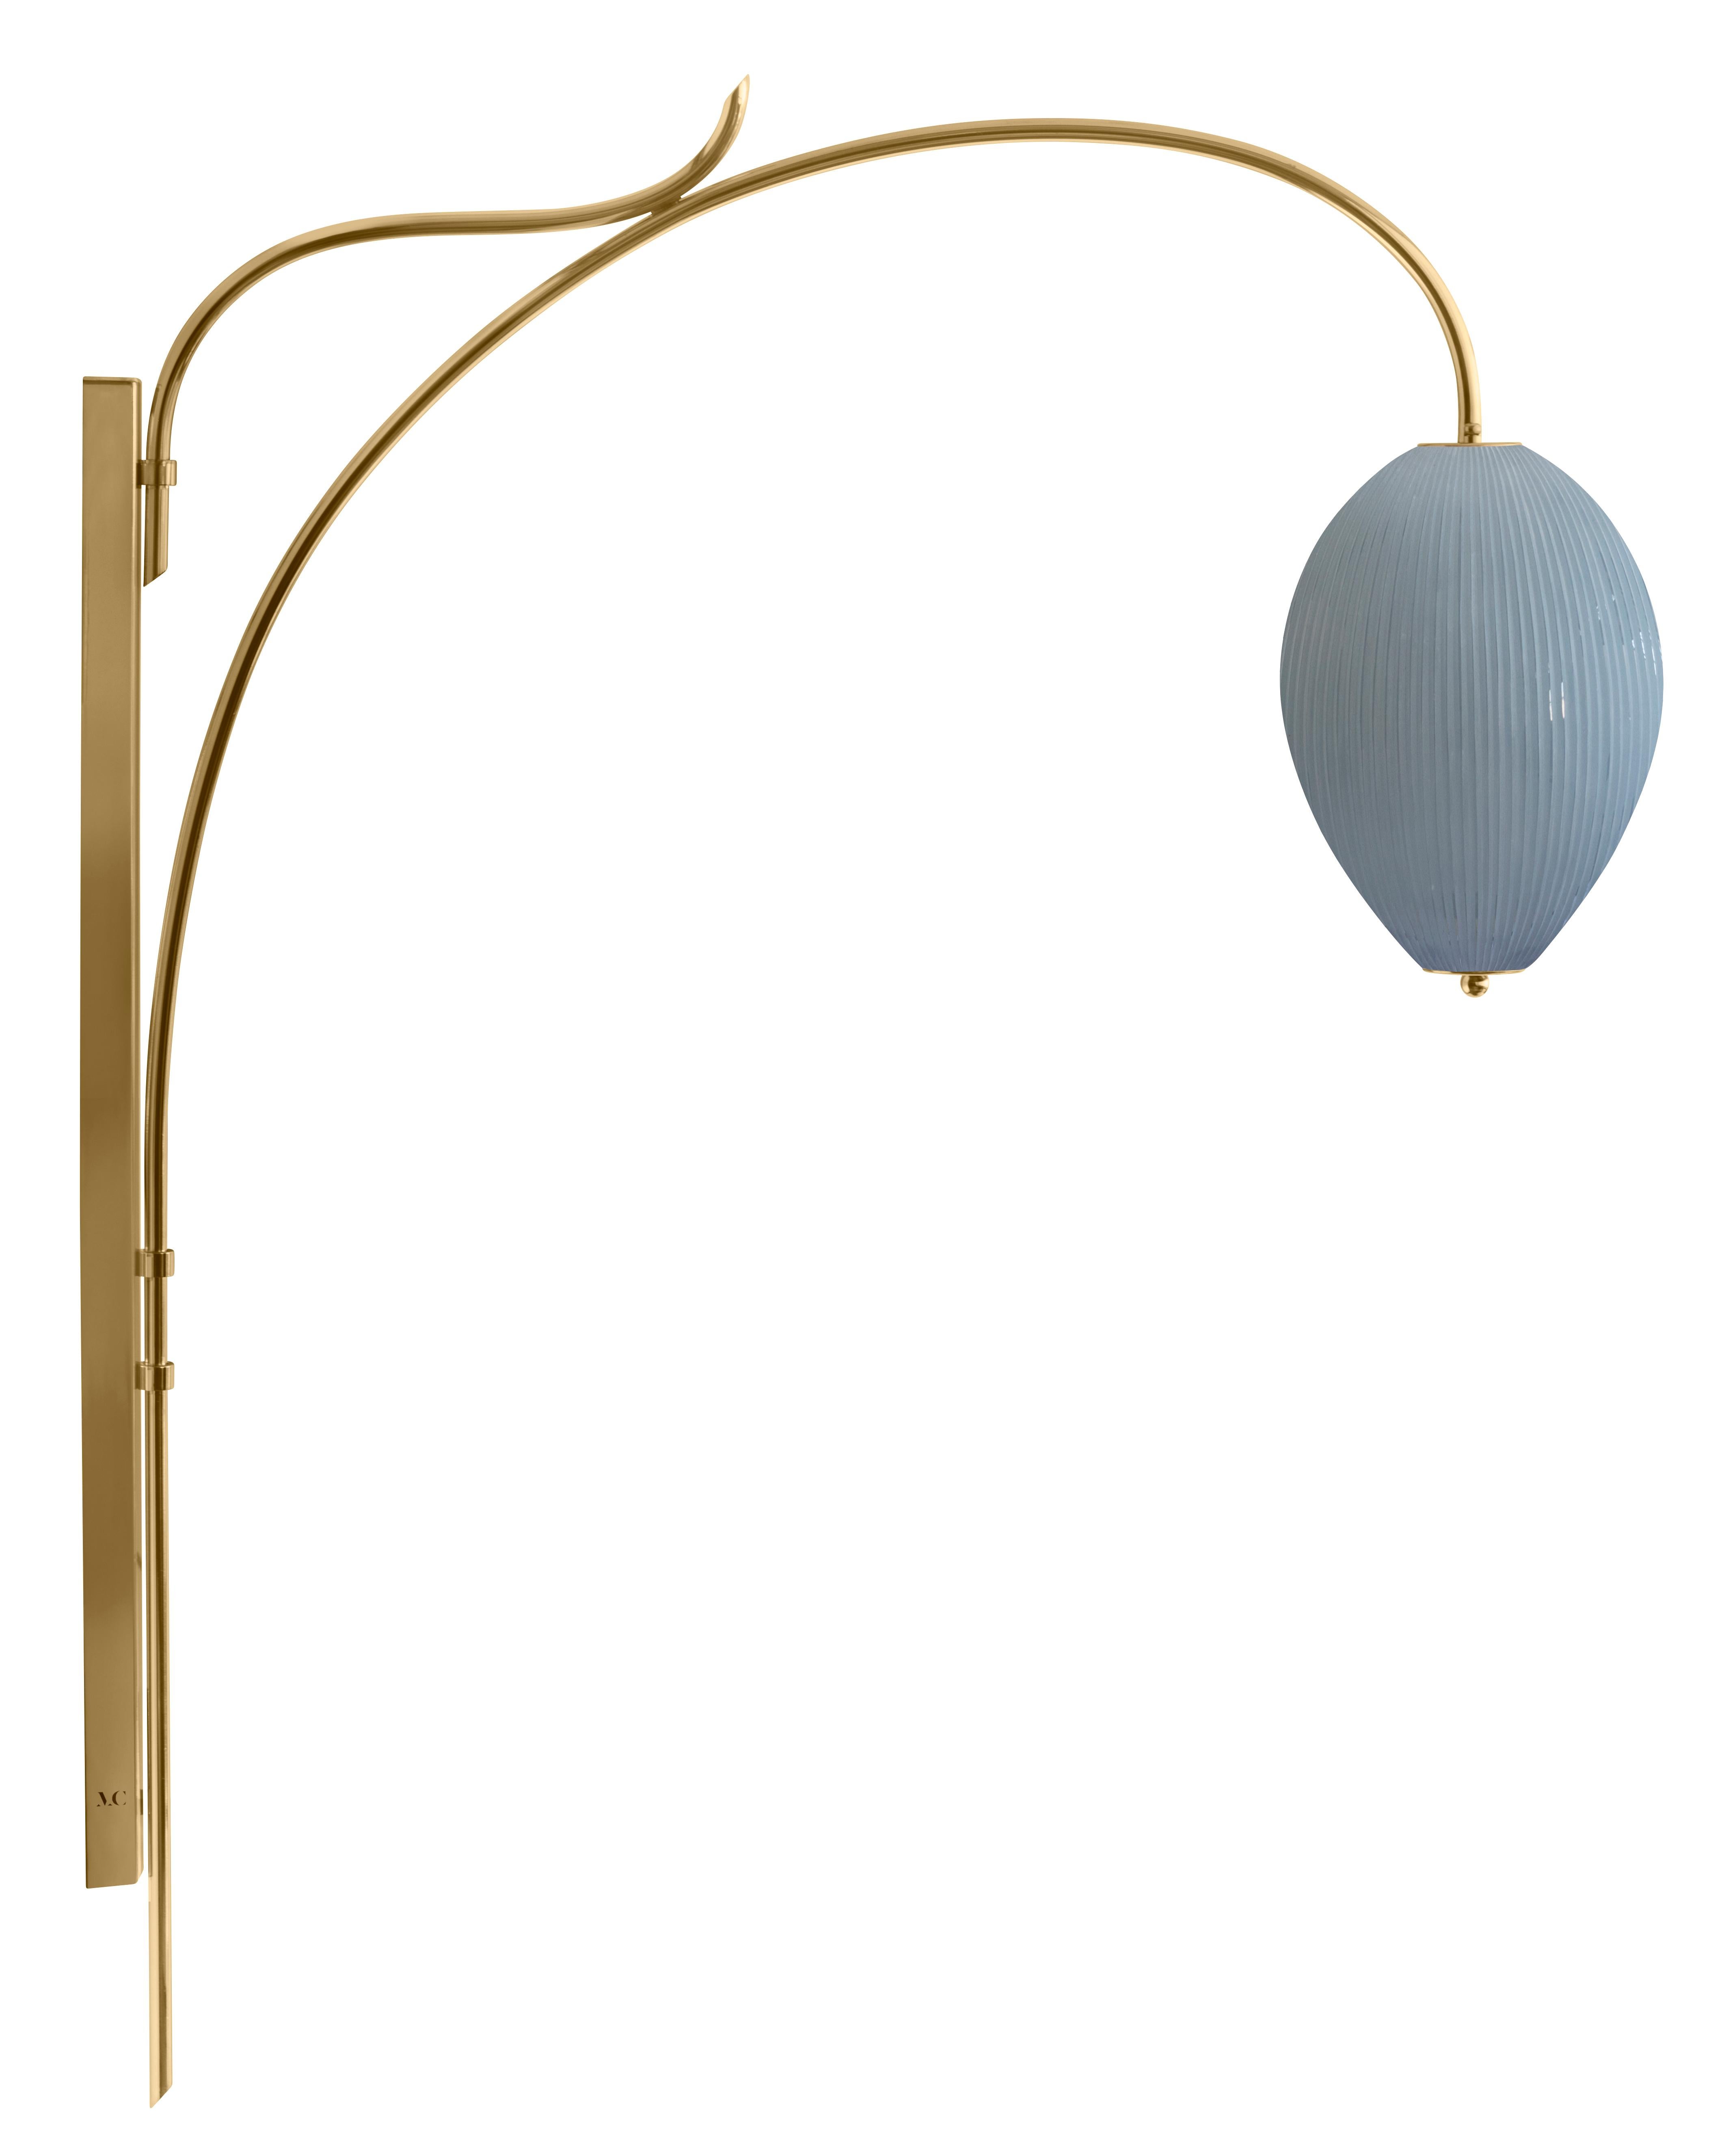 Wall lamp China 10 by Magic Circus Editions
Dimensions: H 134 x W 25.2 x D 113.5 cm
Materials: Brass, mouth blown glass sculpted with a diamond saw
Colour: opal grey

Available finishes: Brass, nickel
Available colours: enamel soft white, soft